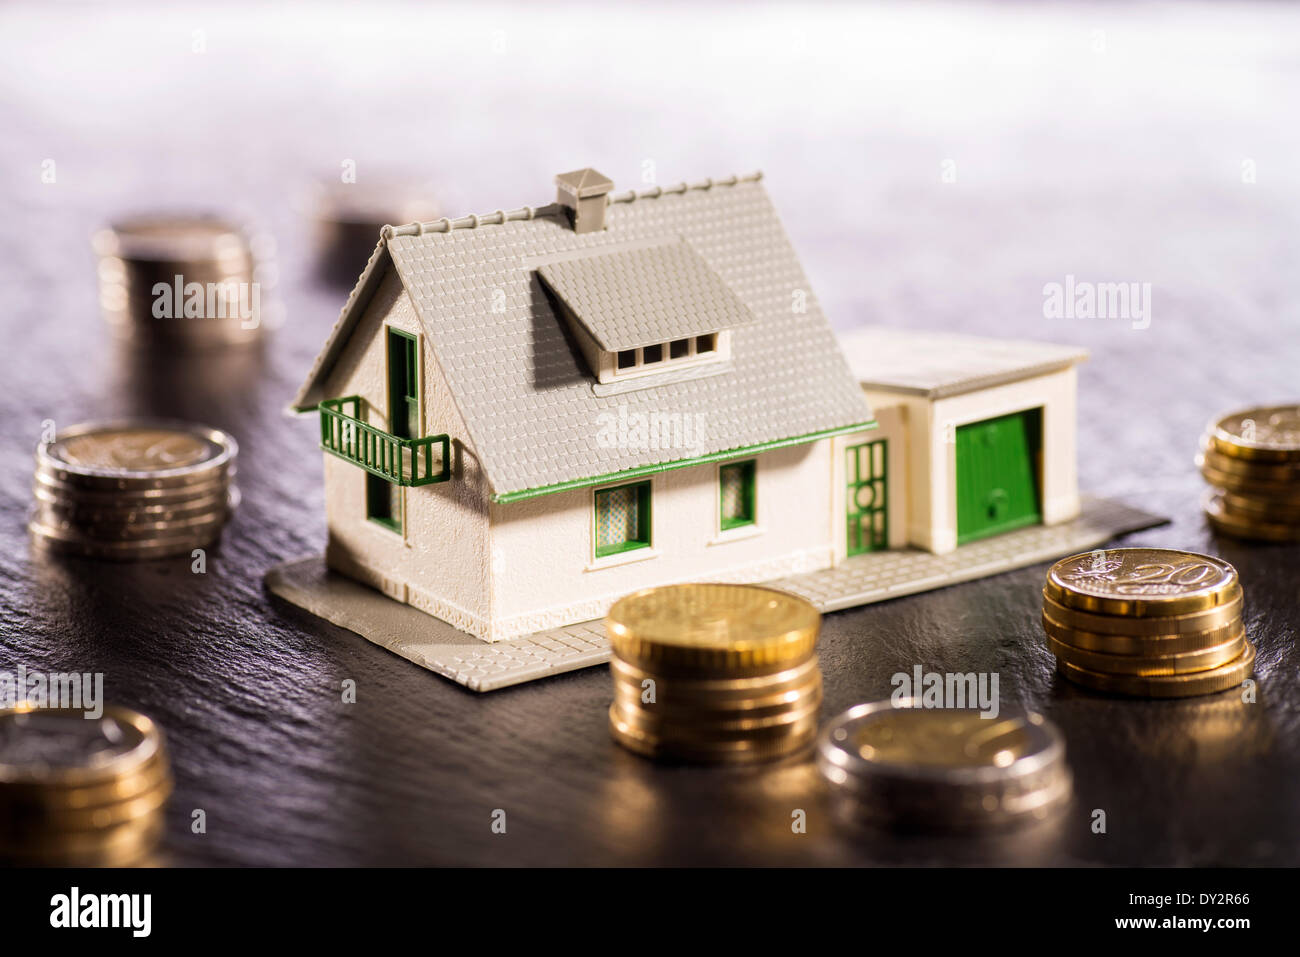 Older house is surrounded by coins. Illustration - March 2014 Stock Photo